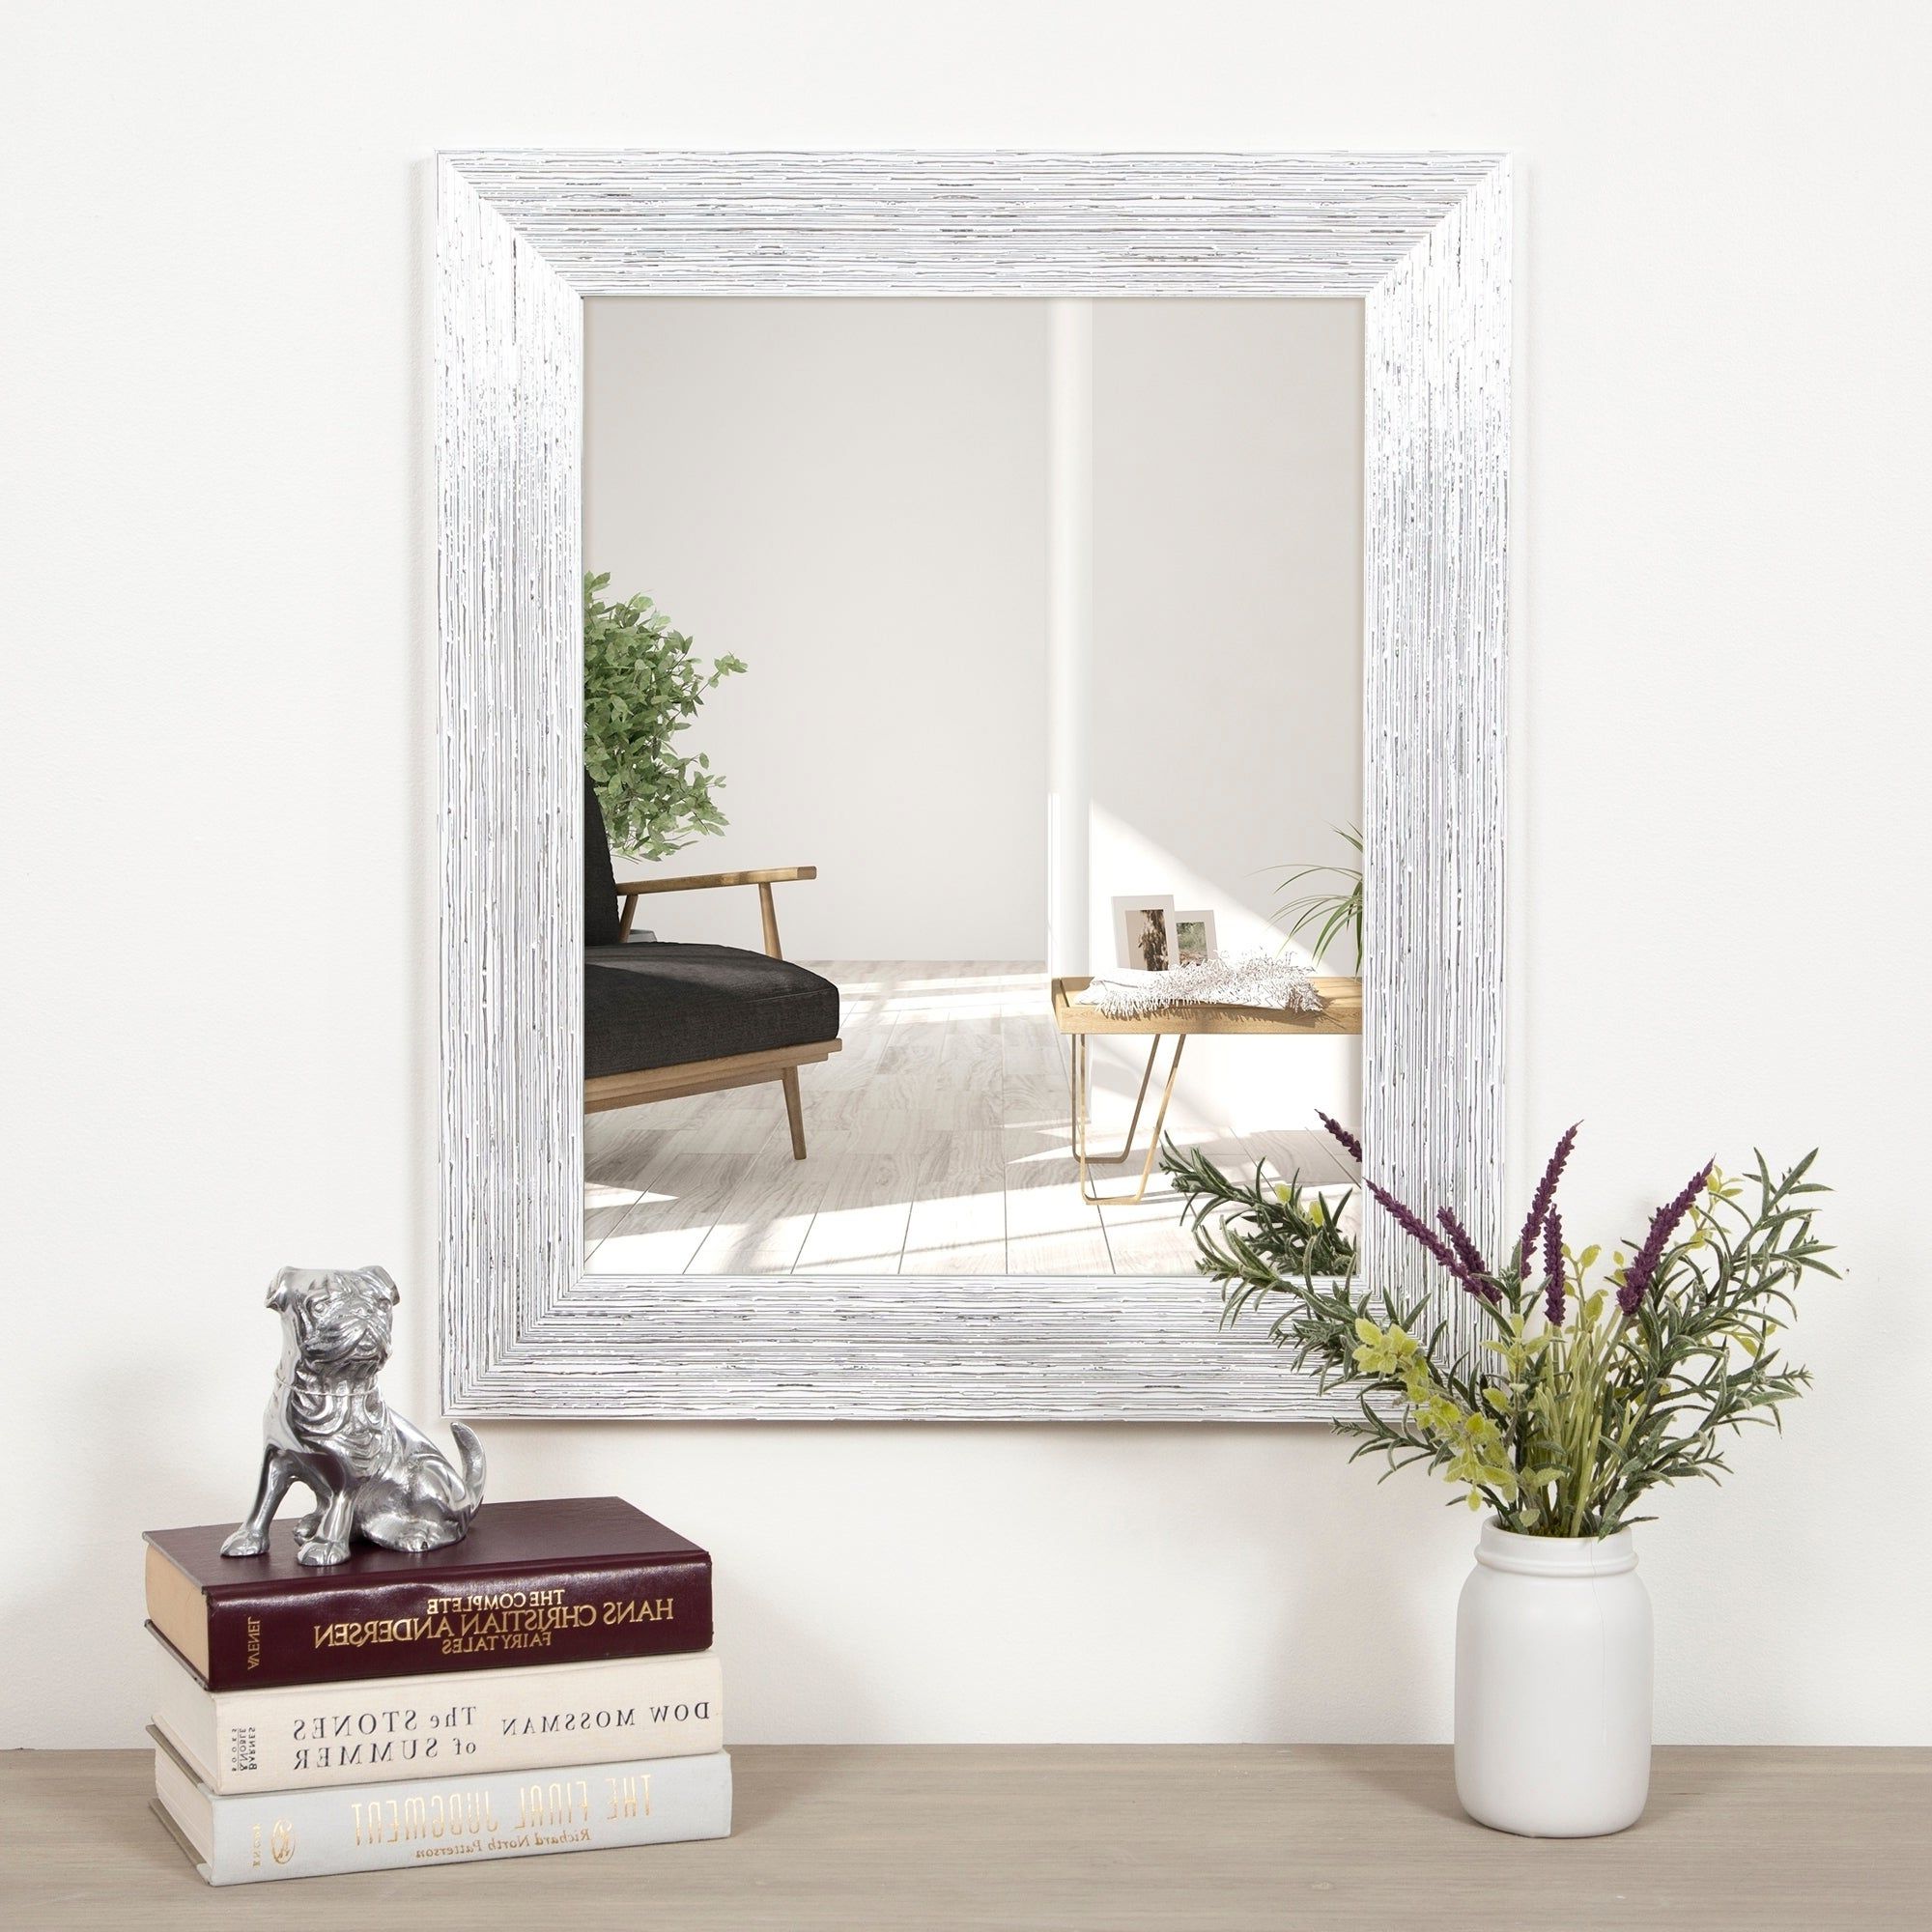 Gallery Solutions Textured White And Silver Framed Accent Wall Mirror For Fashionable Accent Wall Mirrors (View 3 of 20)